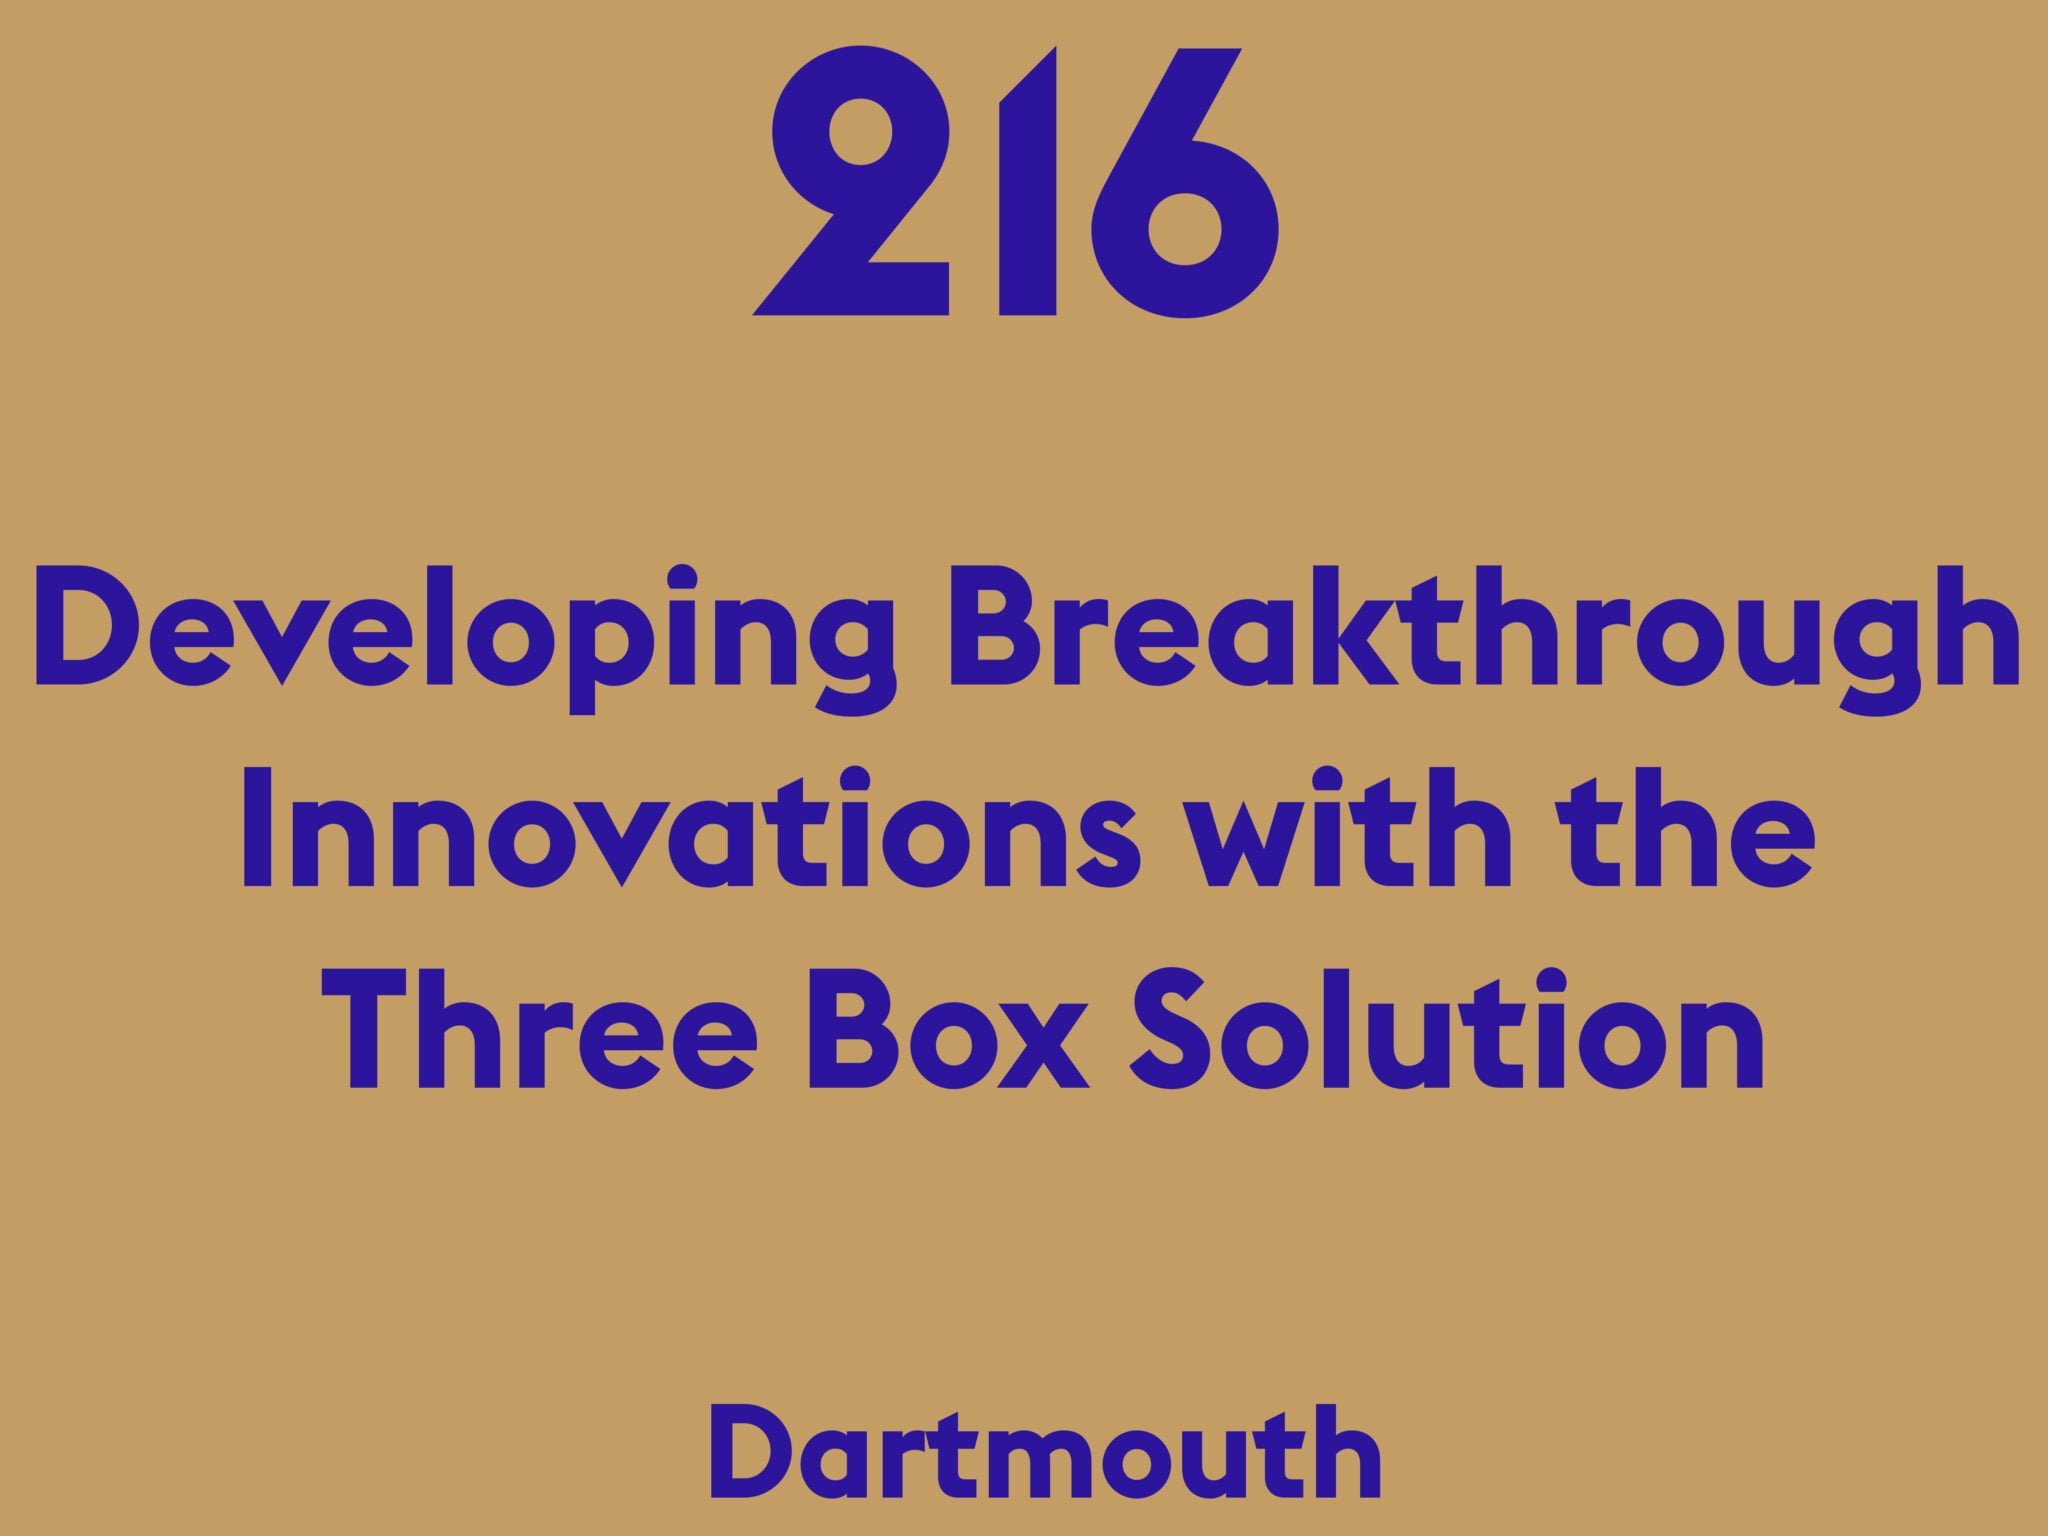 Developing Breakthrough Innovations with the Three Box Solution